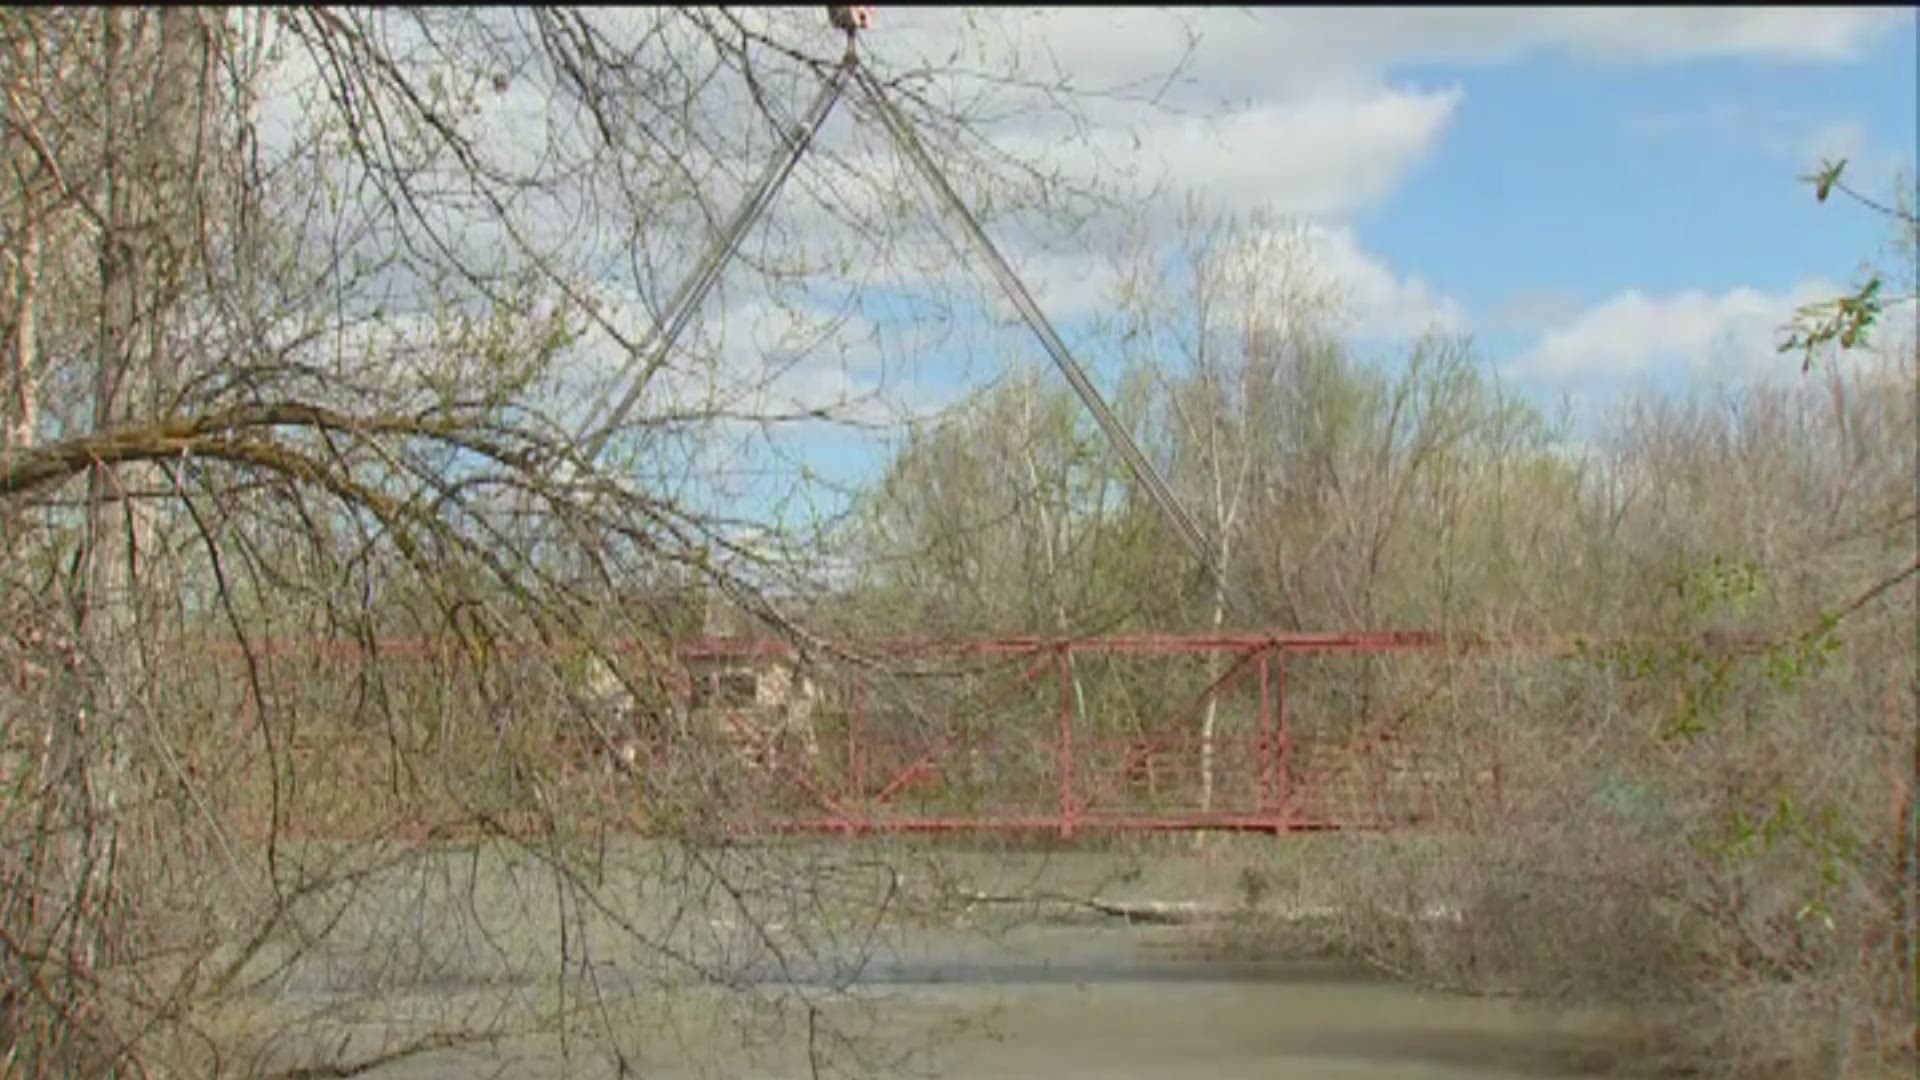 WATCH: Bridge removed over concerns it could break loose into the Boise River